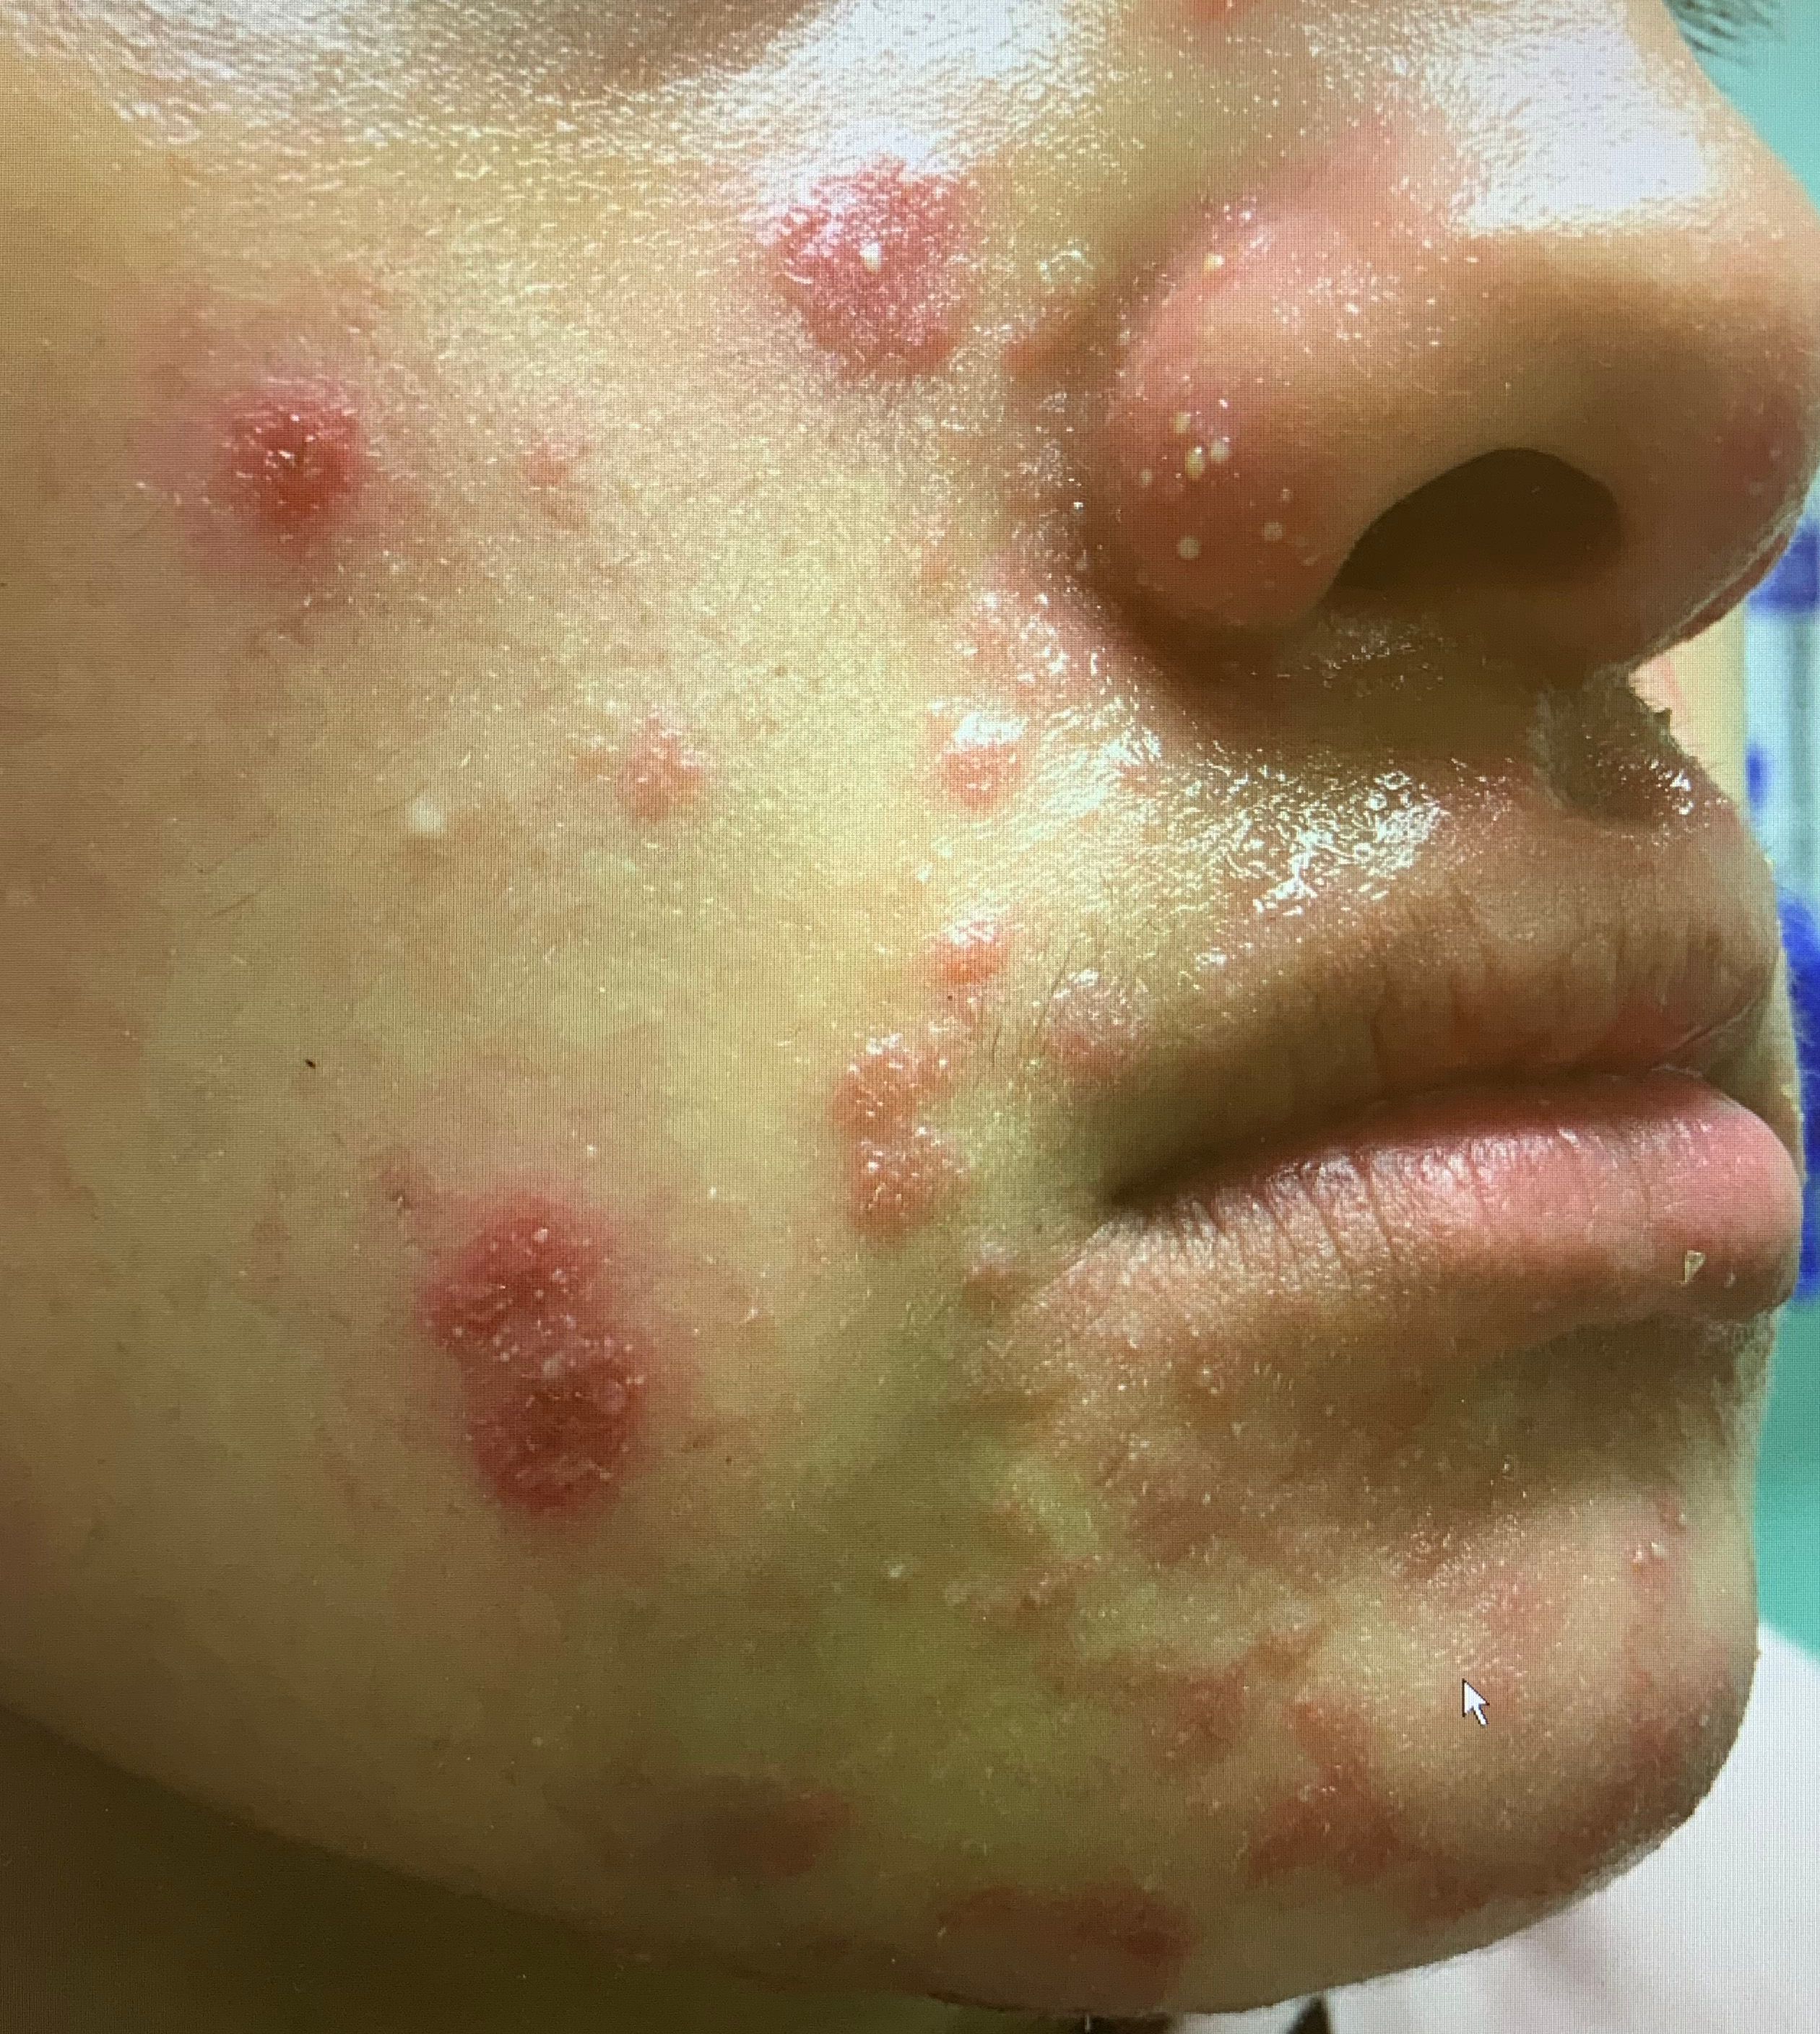 A 12-year-old patient presents with an inflammatory acneiform eruption across their face.